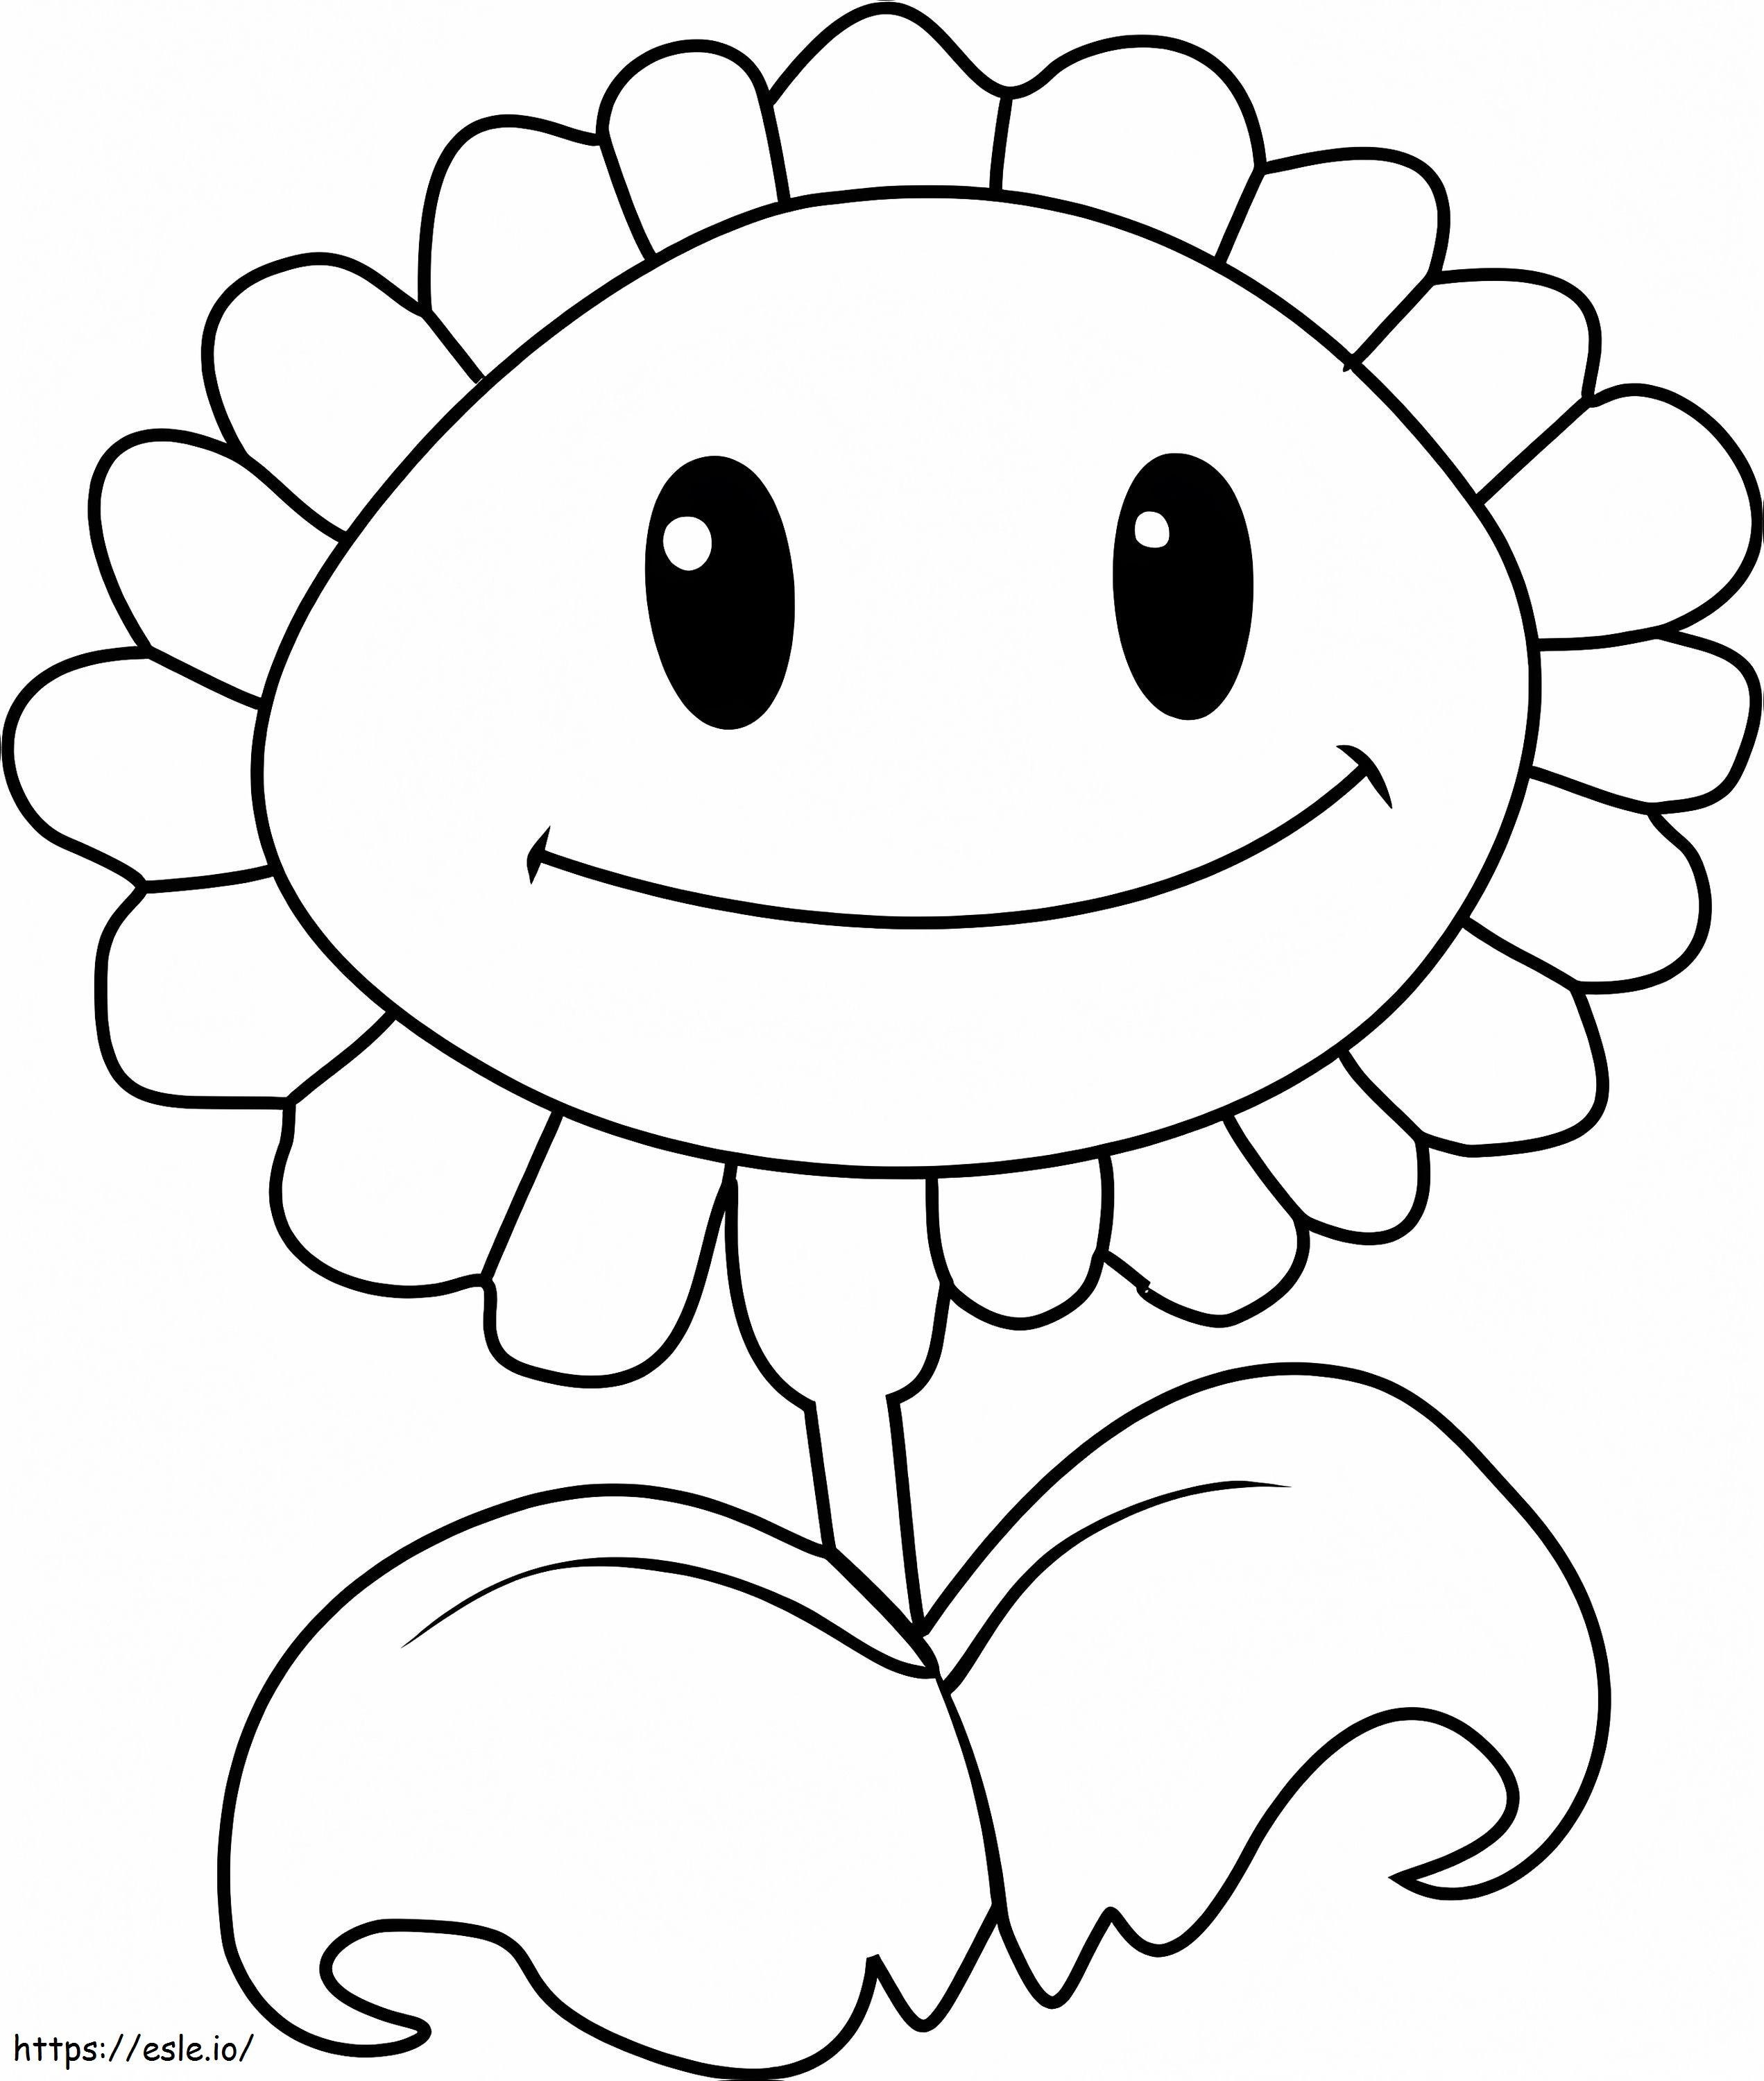 Smiling Sunflower From Plant Vs Zombie coloring page